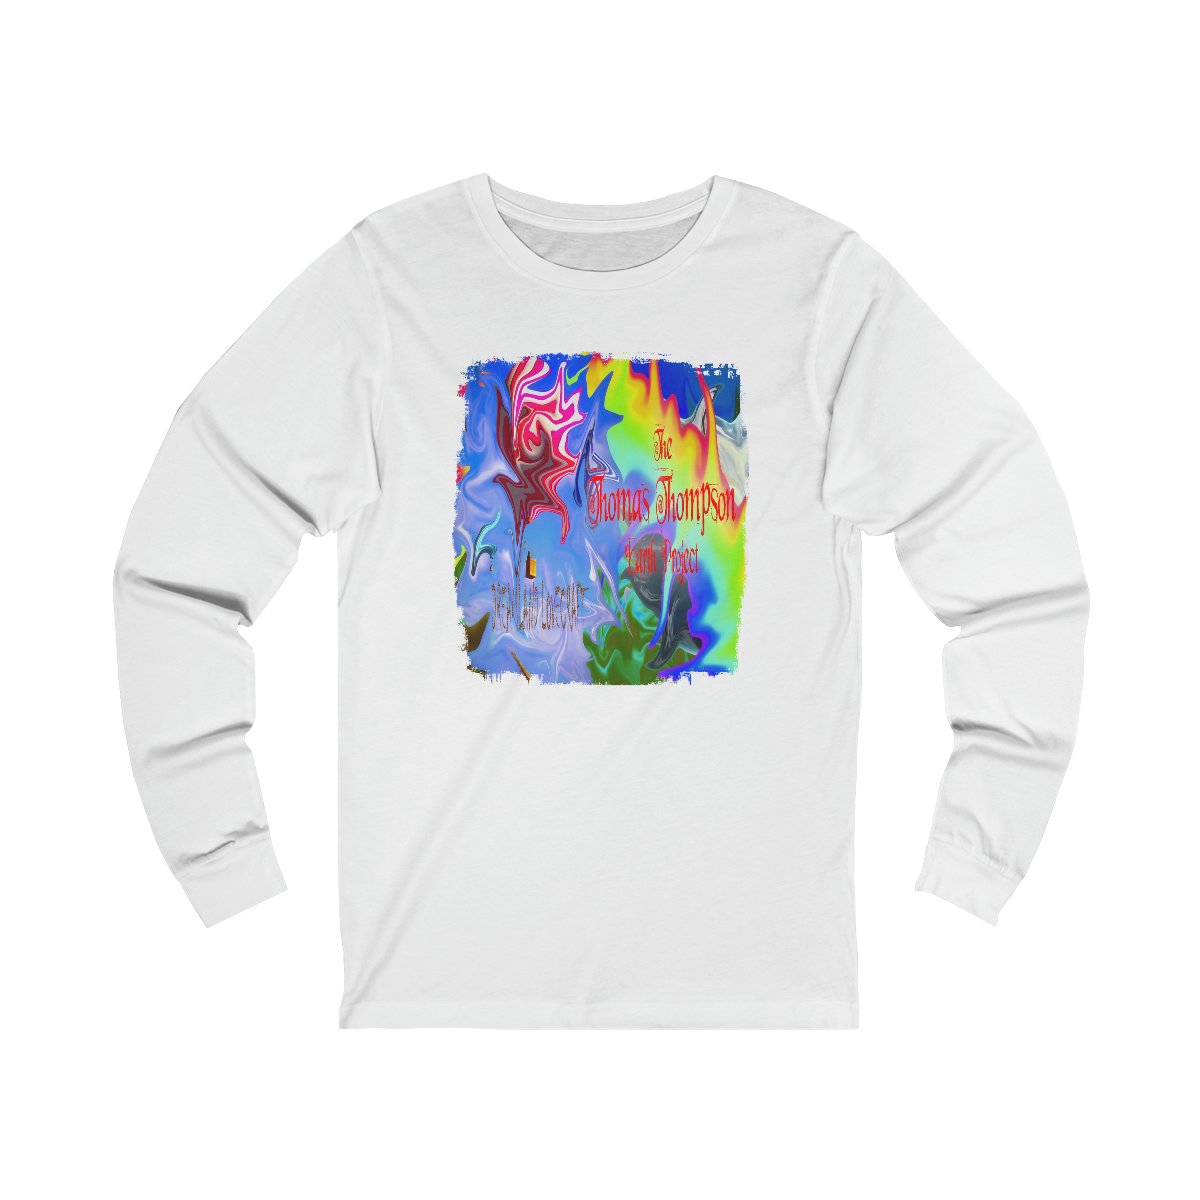 The Thomas Thompson Earth Project Dreamland Lovecraft Long Sleeve Tee 3501